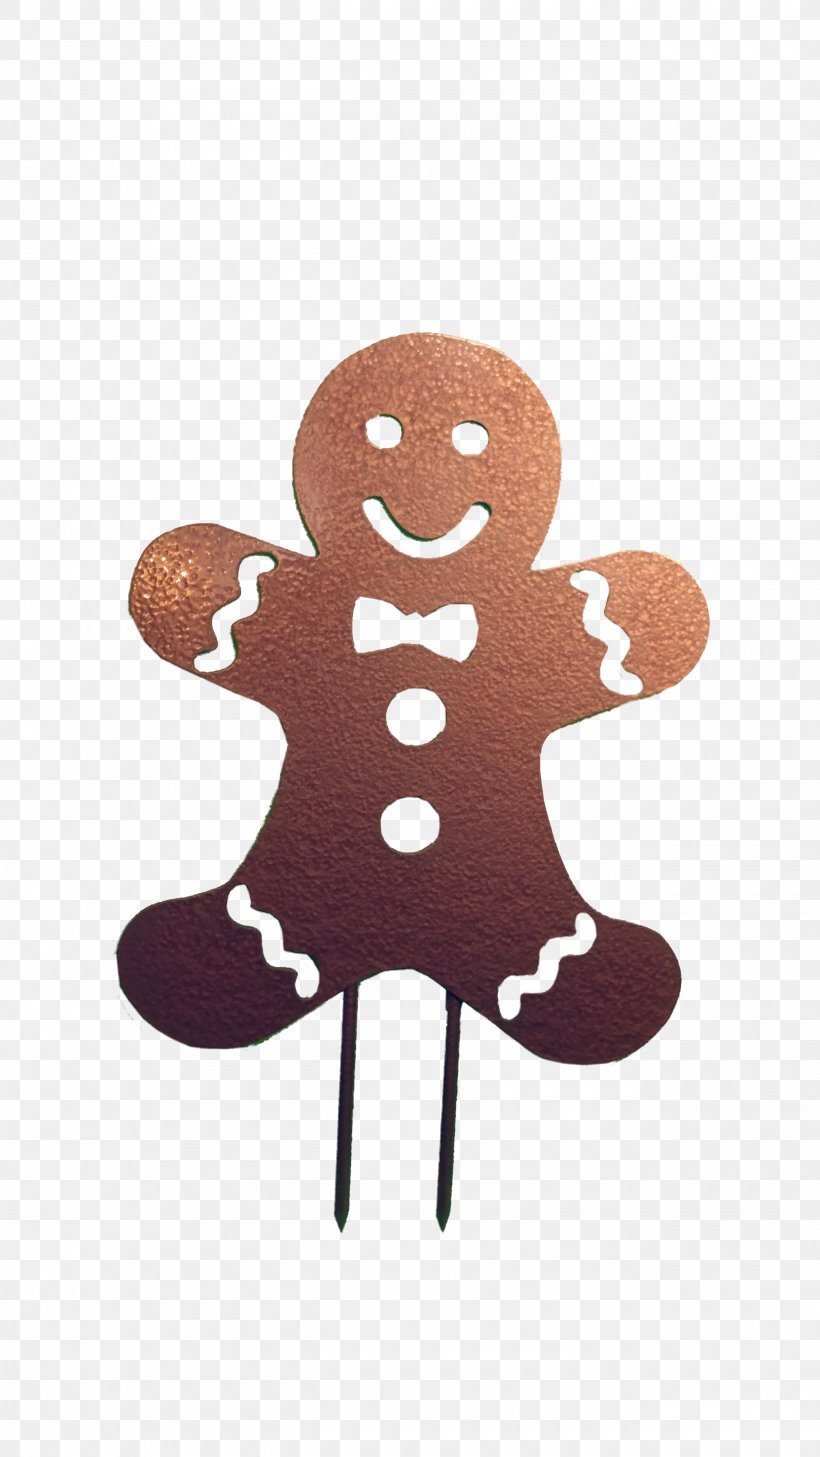 Gingerbread Man Biscuits, PNG, 2620x4656px, Gingerbread Man, Biscuits, Cake, Chocolate, Christmas Cookie Download Free